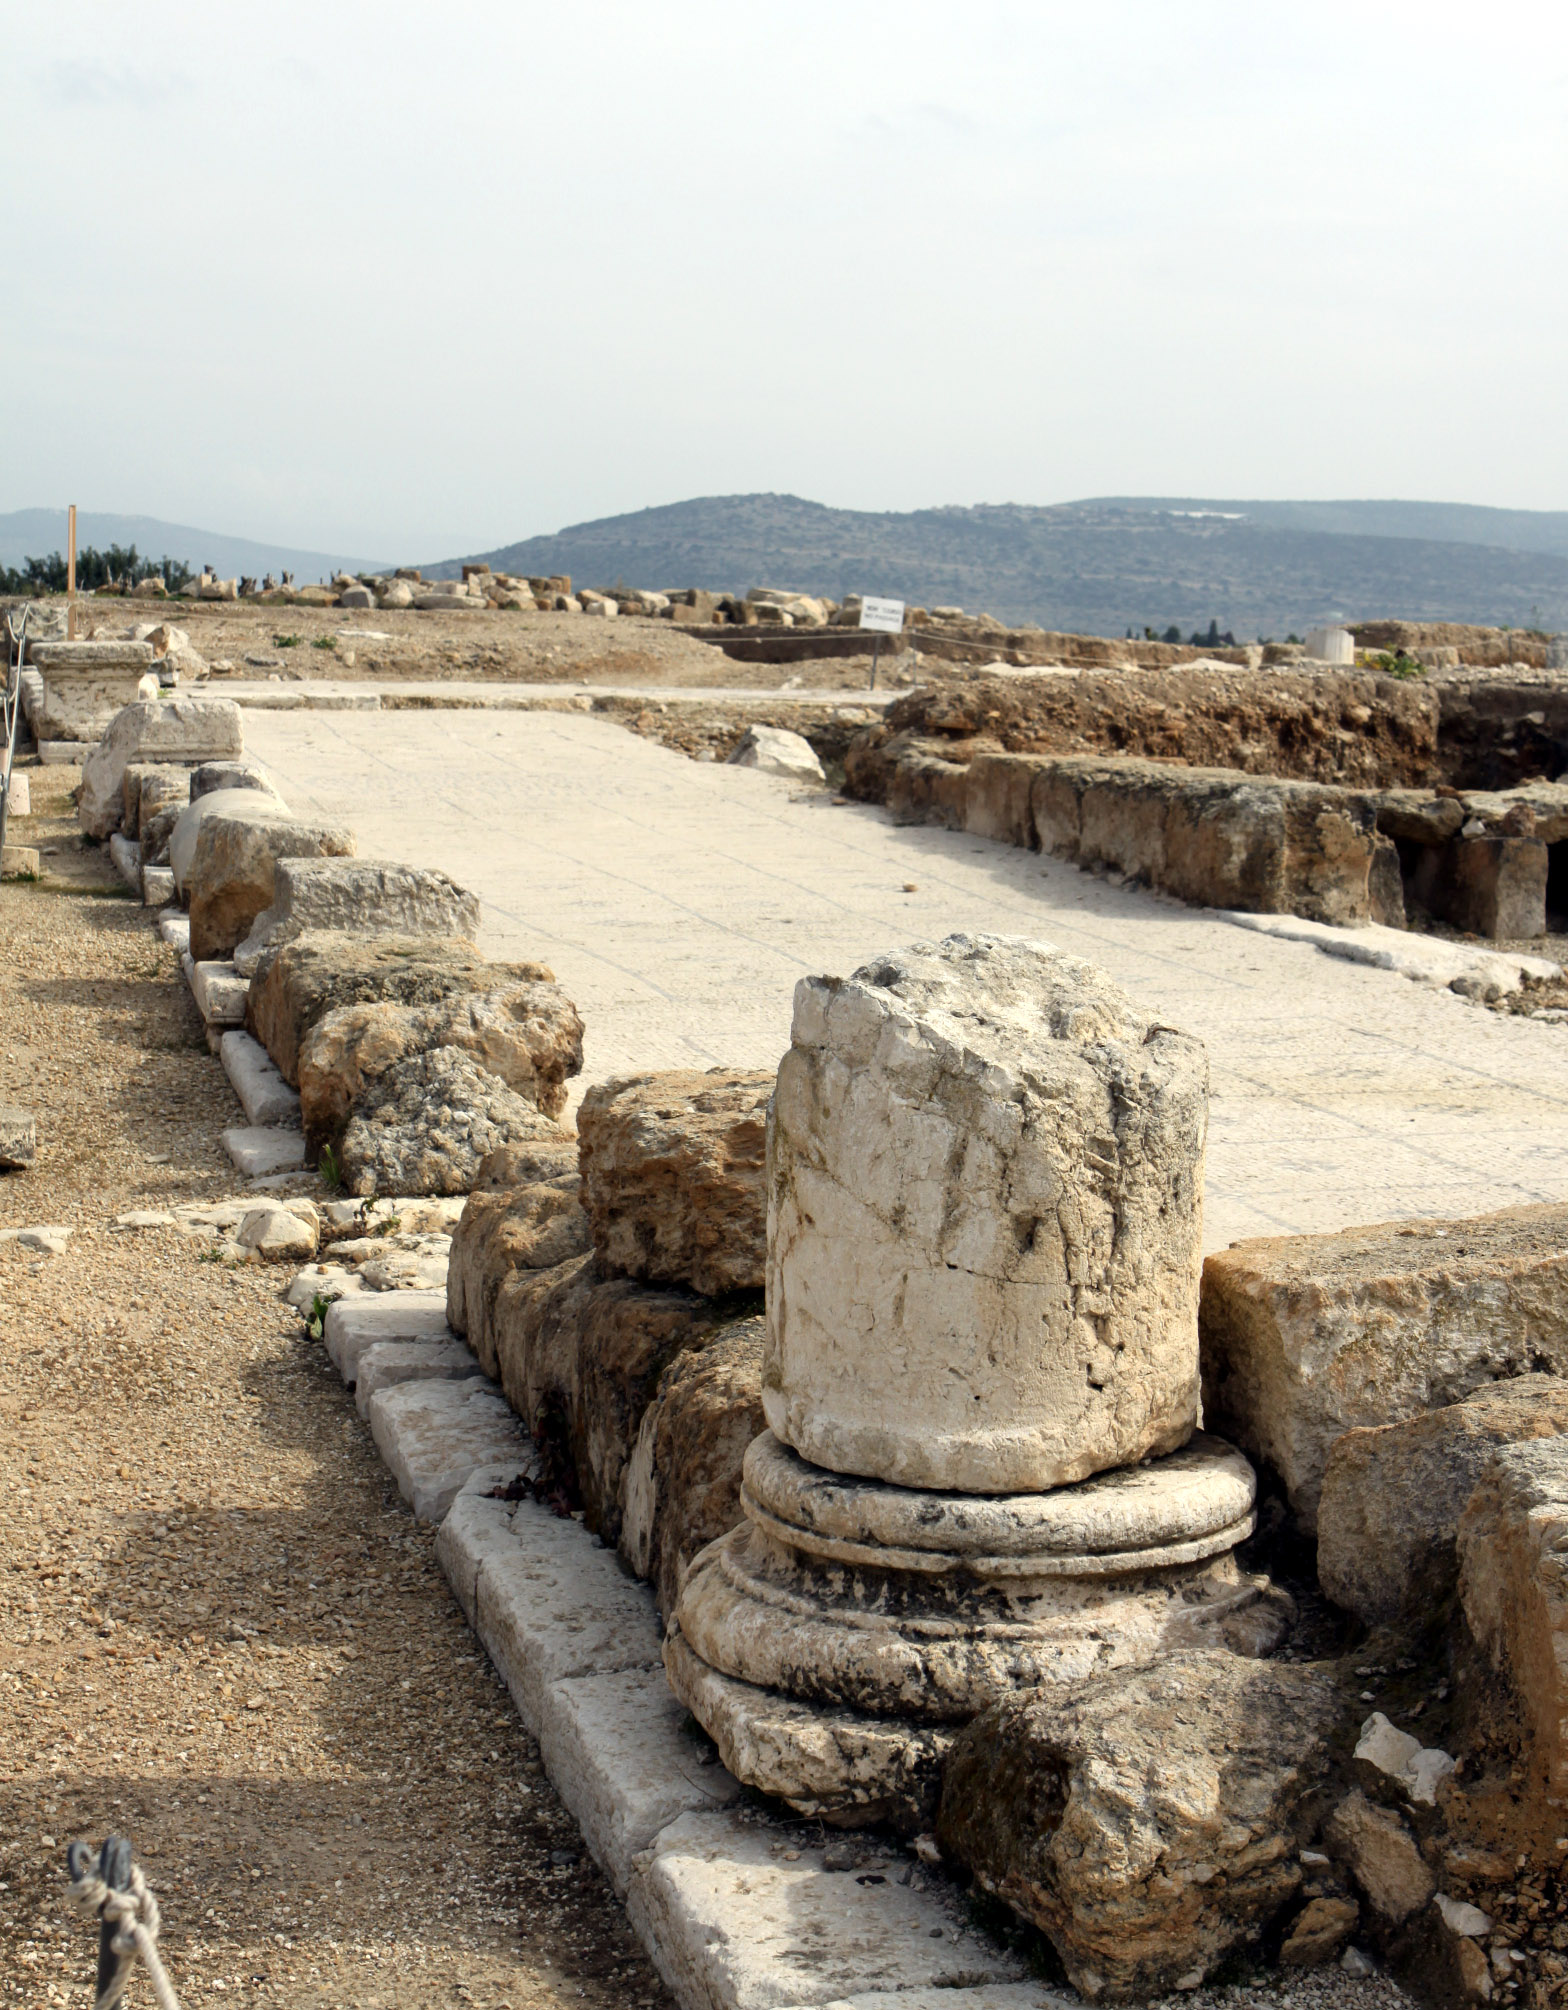 Frivolous courtesans would have paraded about on the cardo (a north-south oriented, main street) of Sepphoris.